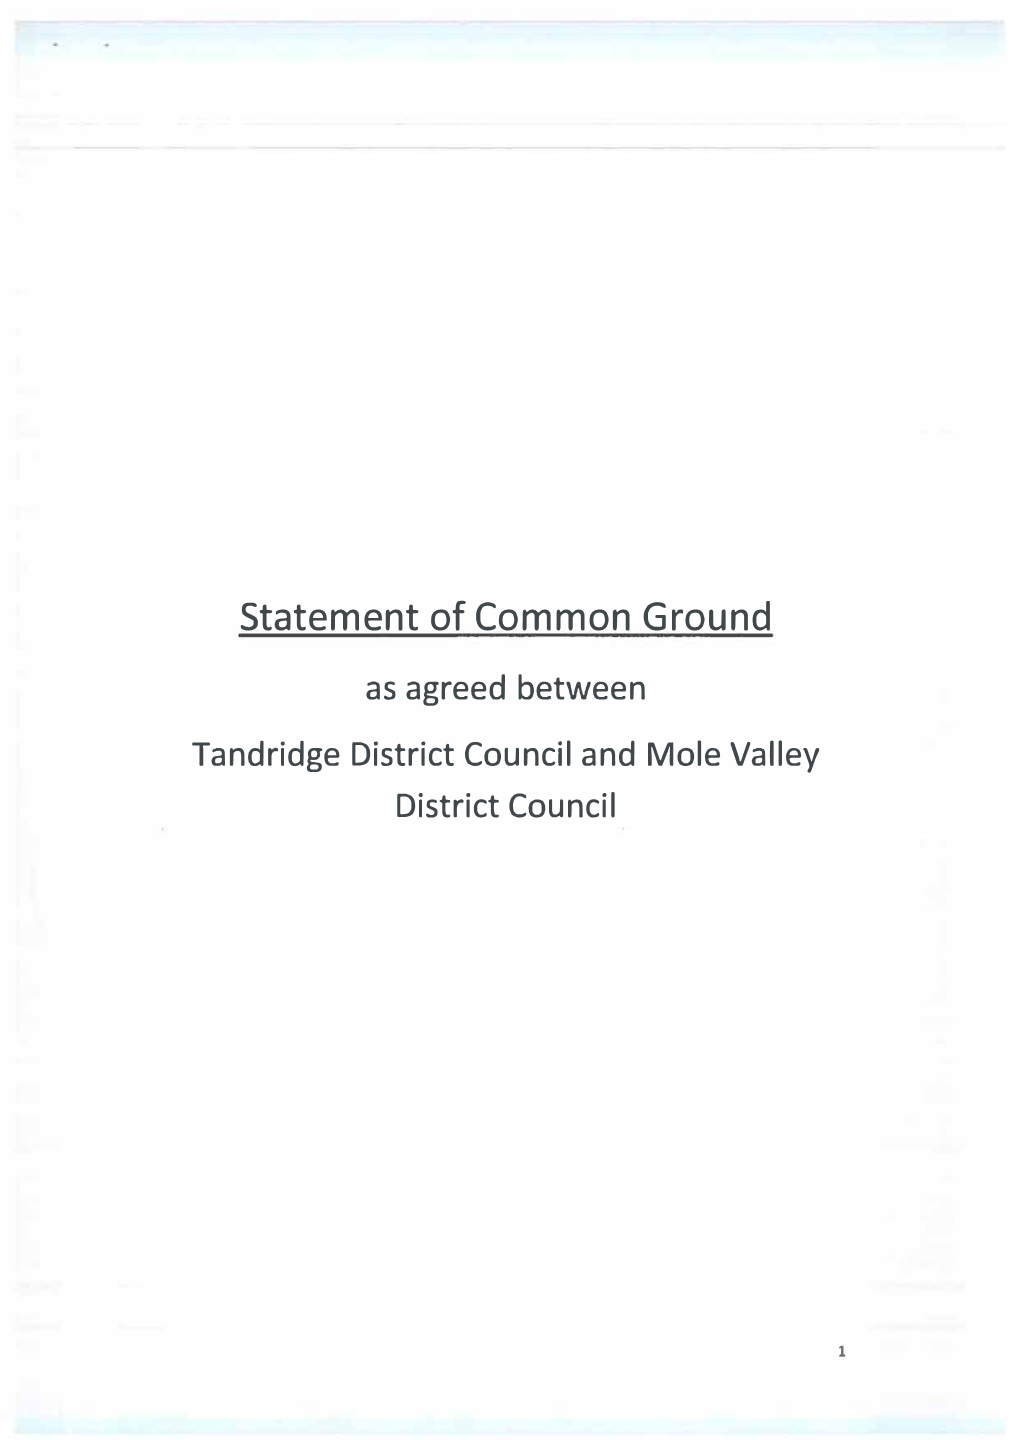 Statement of Common Ground As Agreed Between Tandridge District Council and Mole Valley District Council